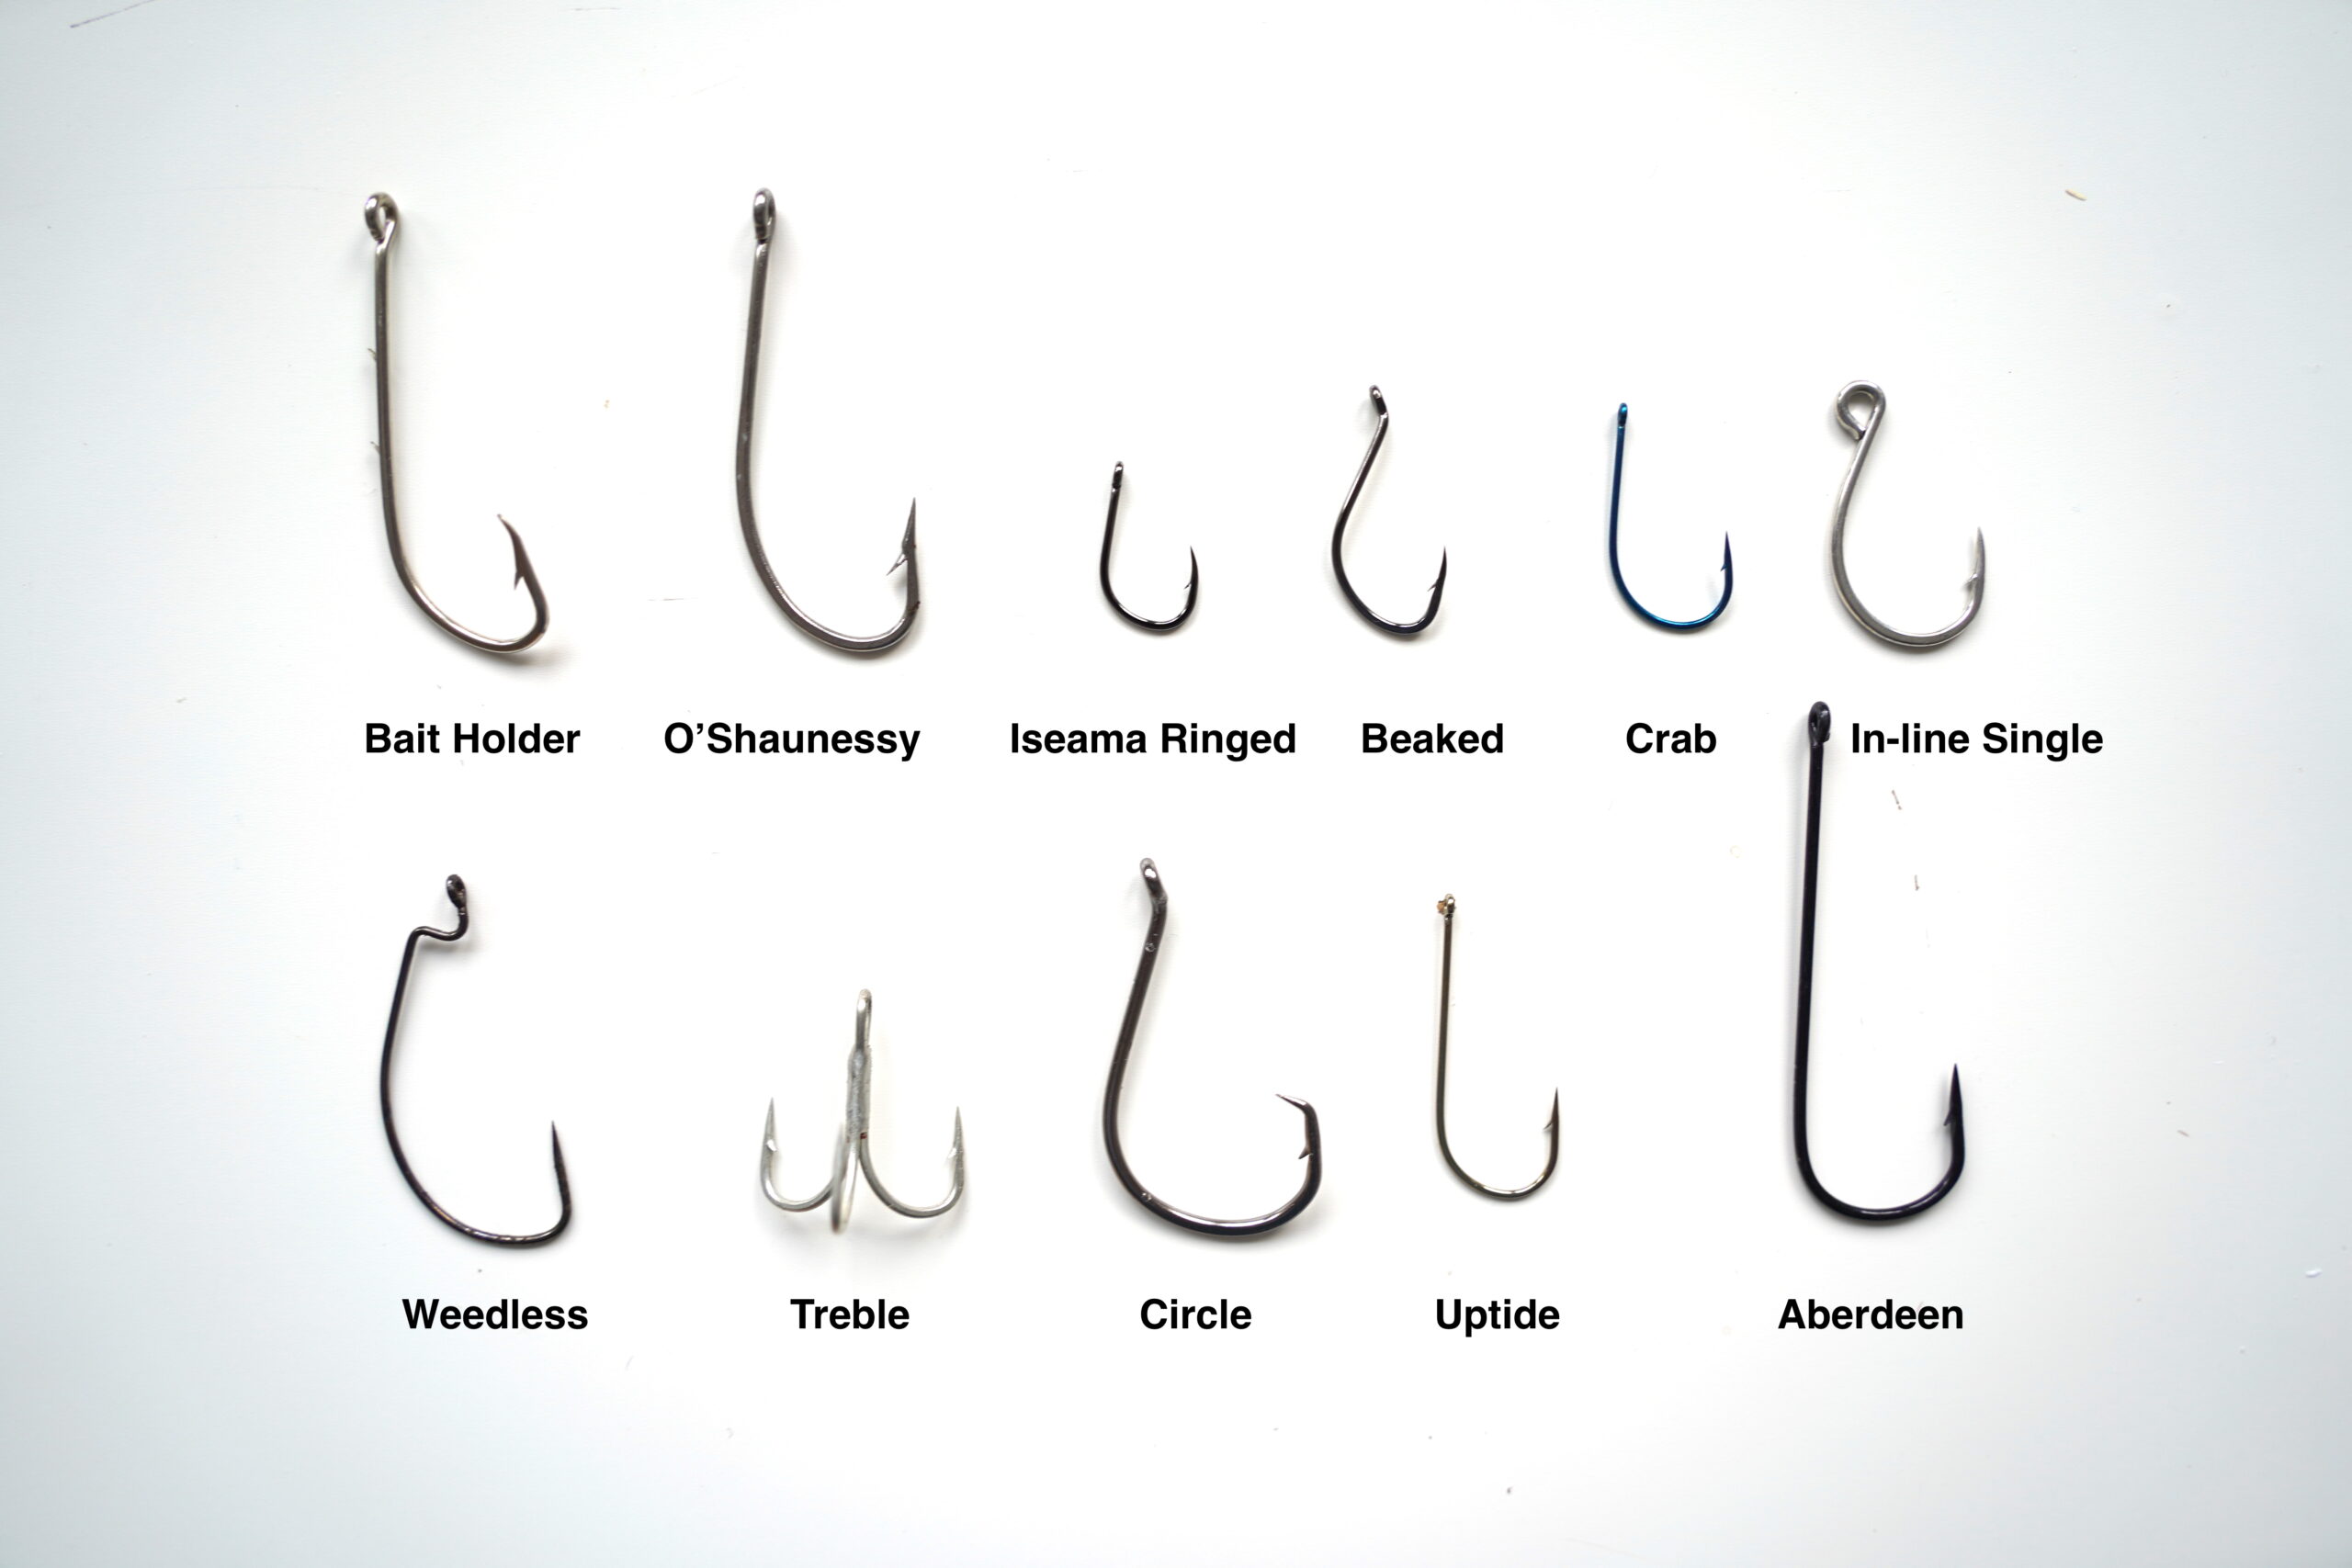 Circle Hook Size Chart: Best Circle Hooks for Saltwater Fishing